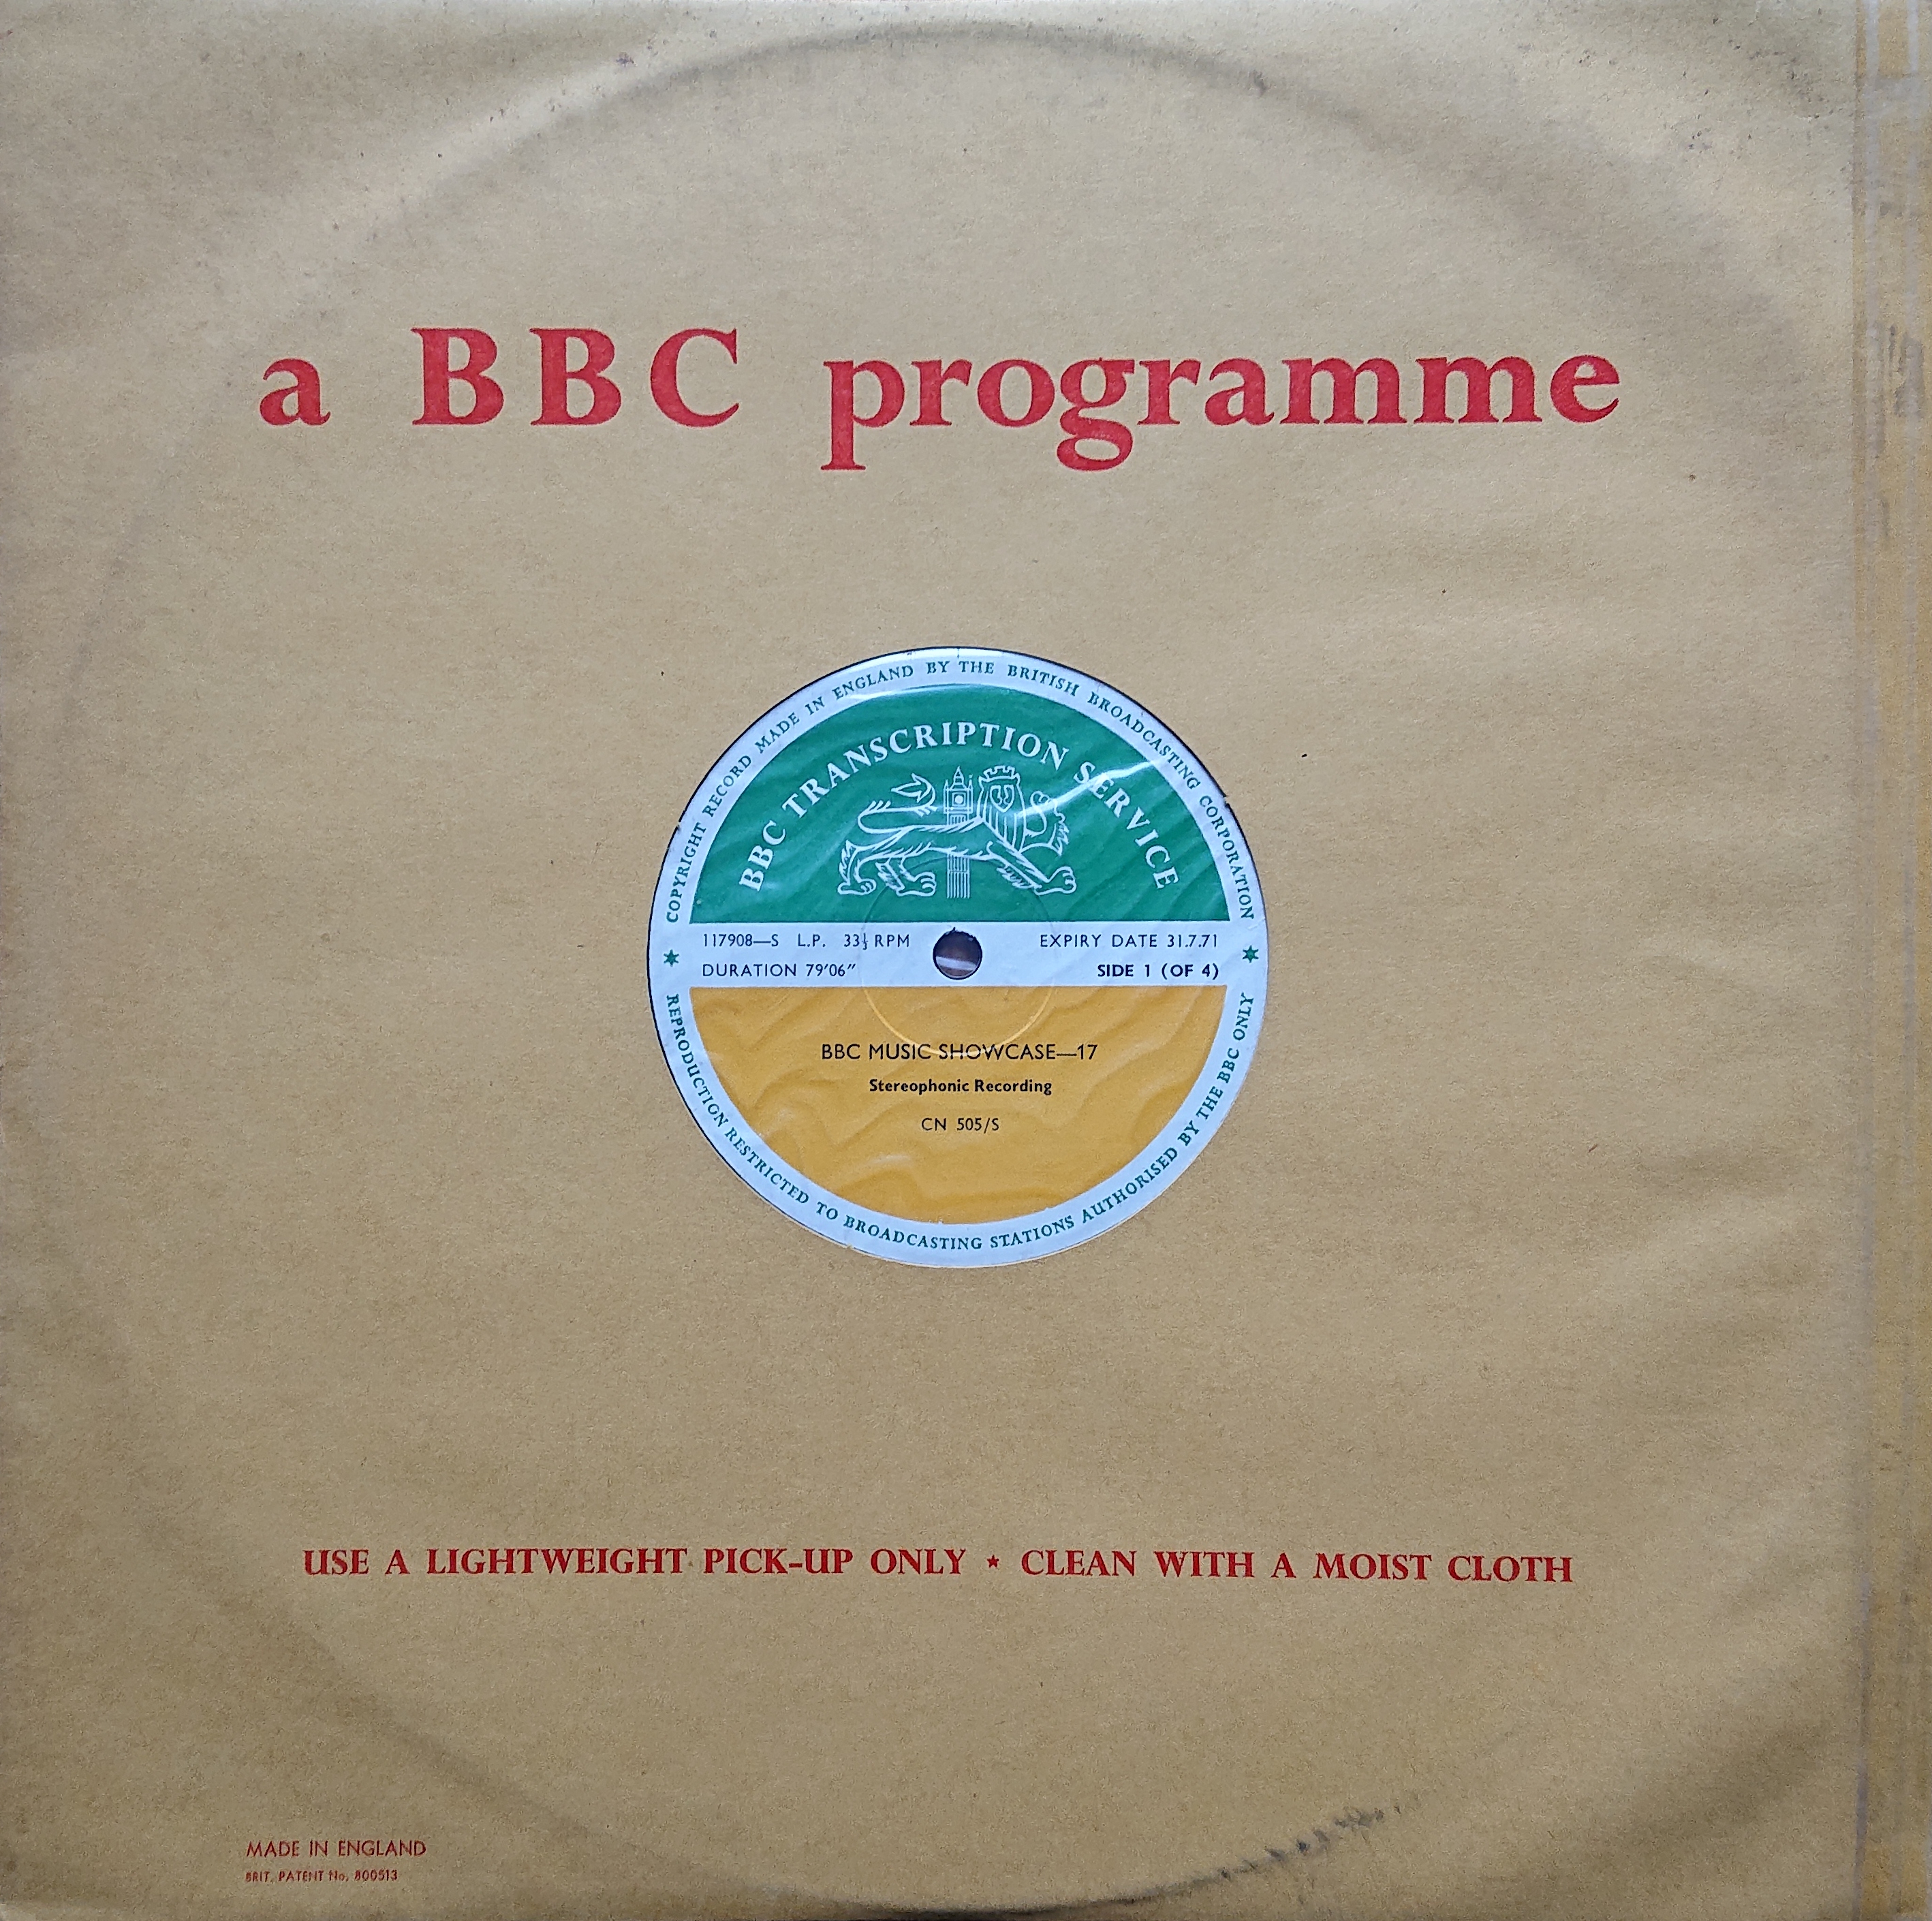 Picture of CN 505 S 33 BBC music showcase - 17 (Sides 1 & 3) by artist Various from the BBC albums - Records and Tapes library